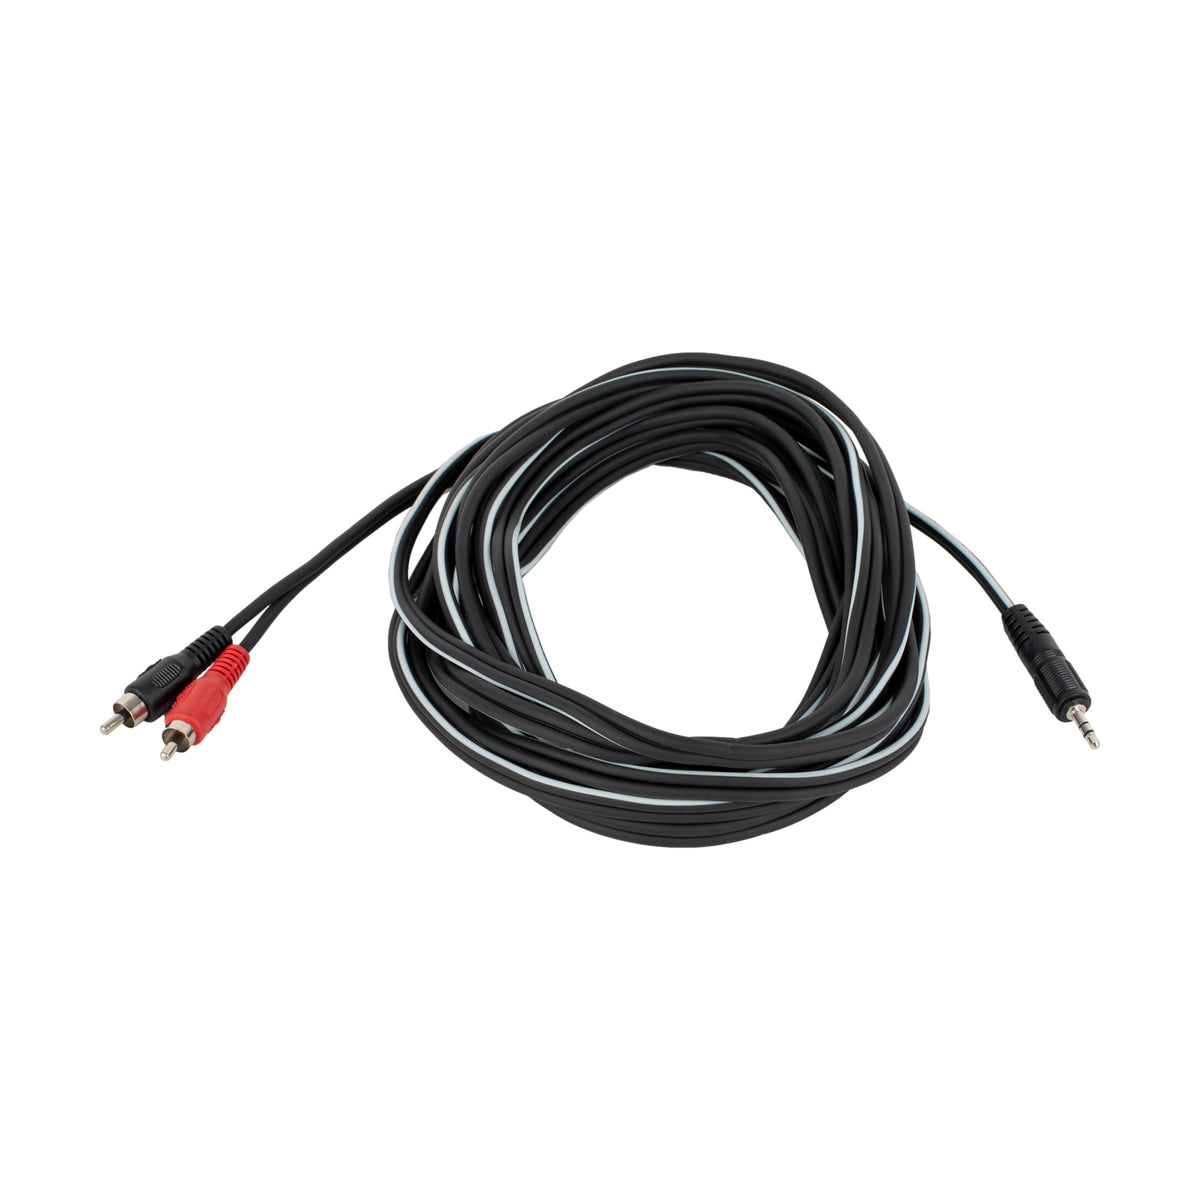 Australasian 3.5mm TRS Male to 2x RCA Male 20ft Cable